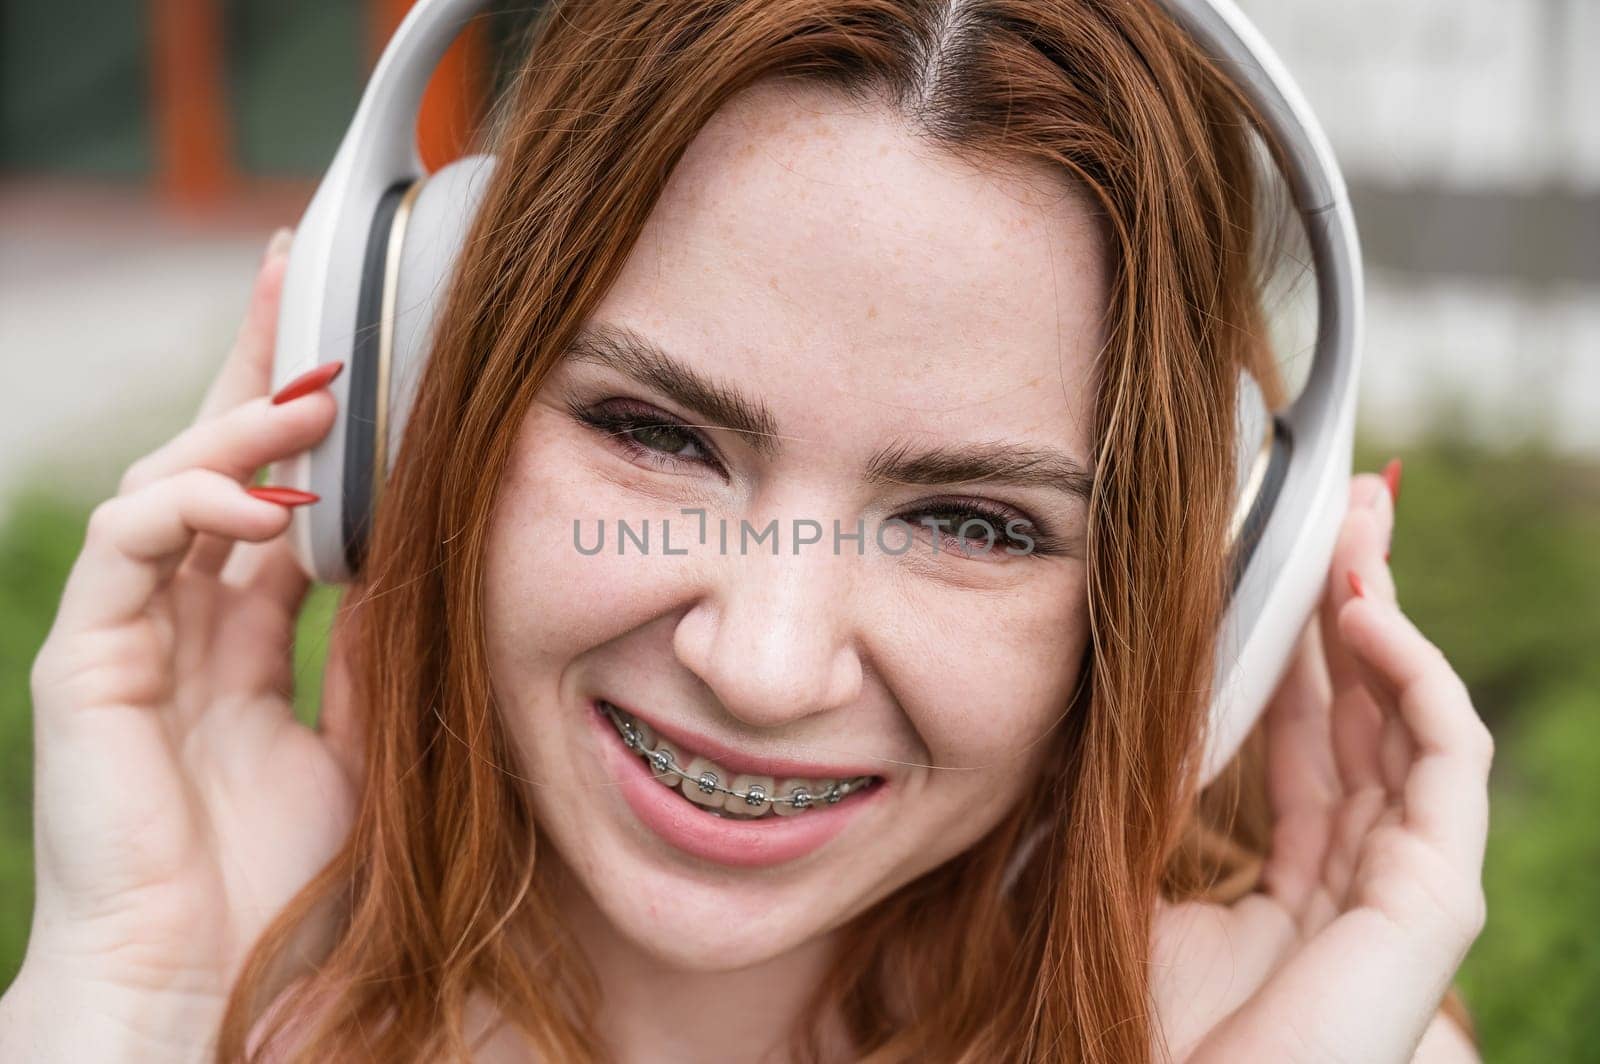 Portrait of a young red-haired woman with braces on her teeth listening to music on headphones outdoors. by mrwed54